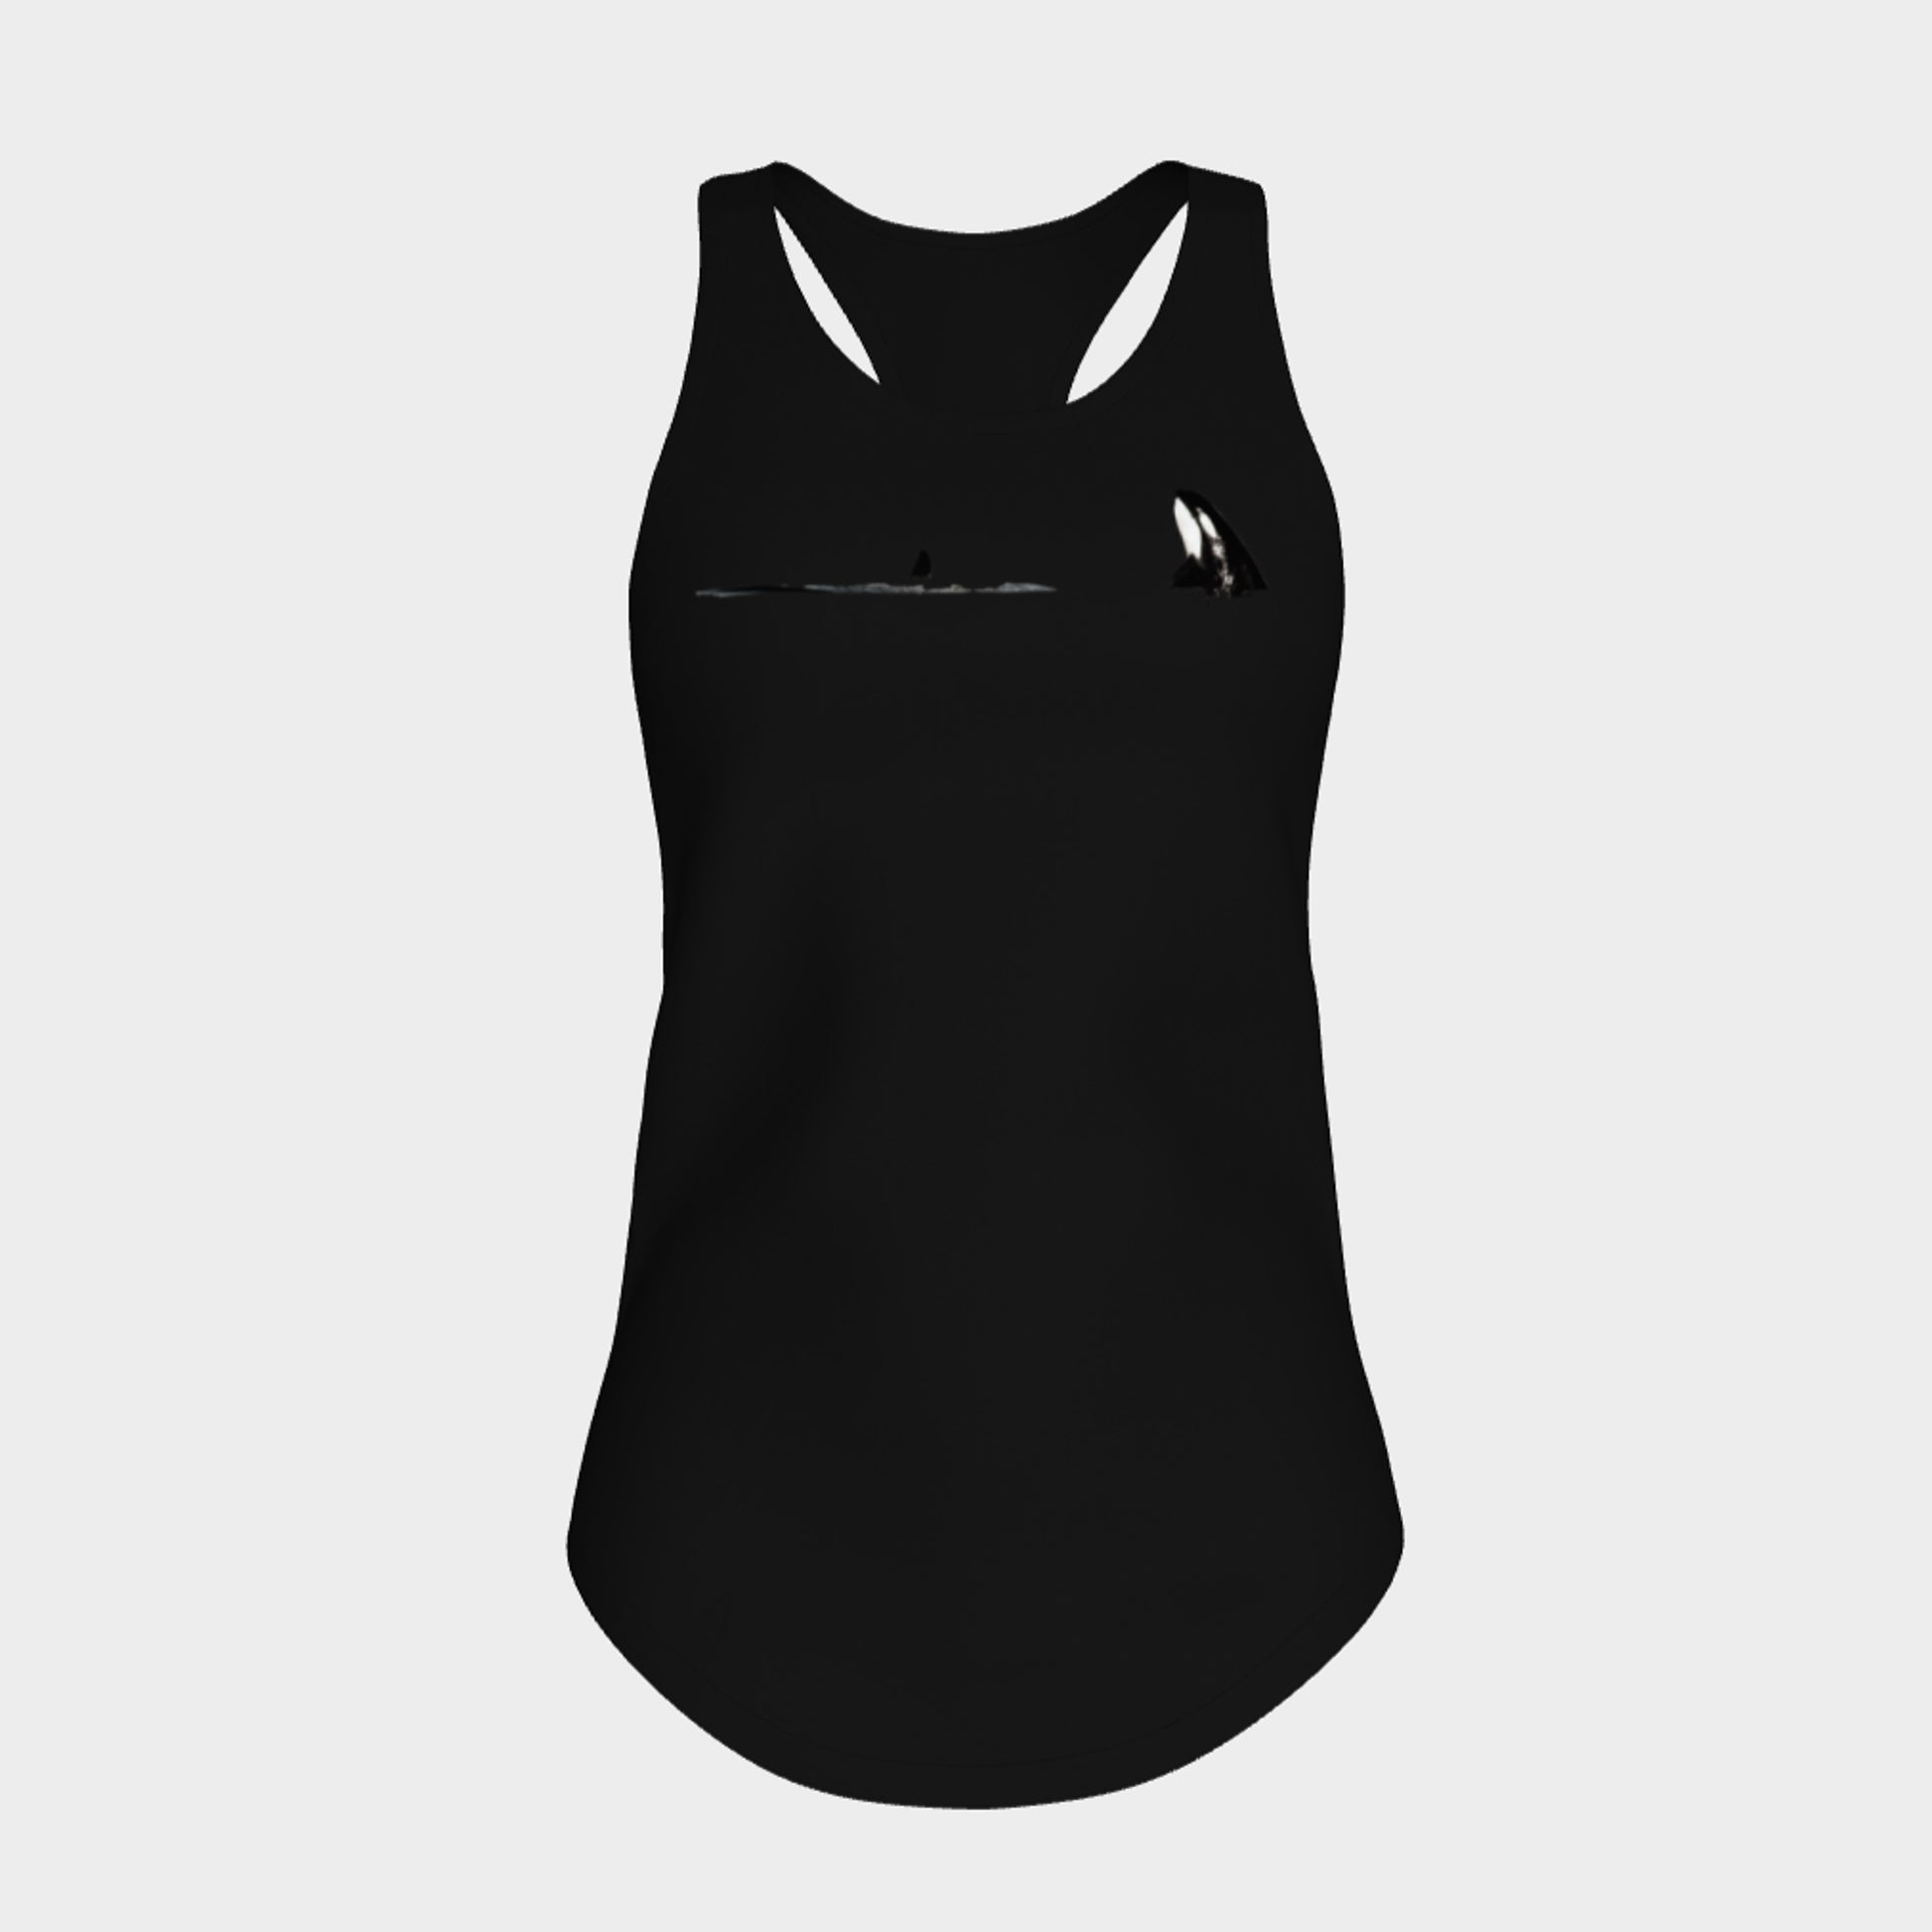 Orca Spy Hop Van Isle Goddess Next Level racerback tank top will quickly become you go-to tank top because of the super comfy fit! VanIsleGoddess.com